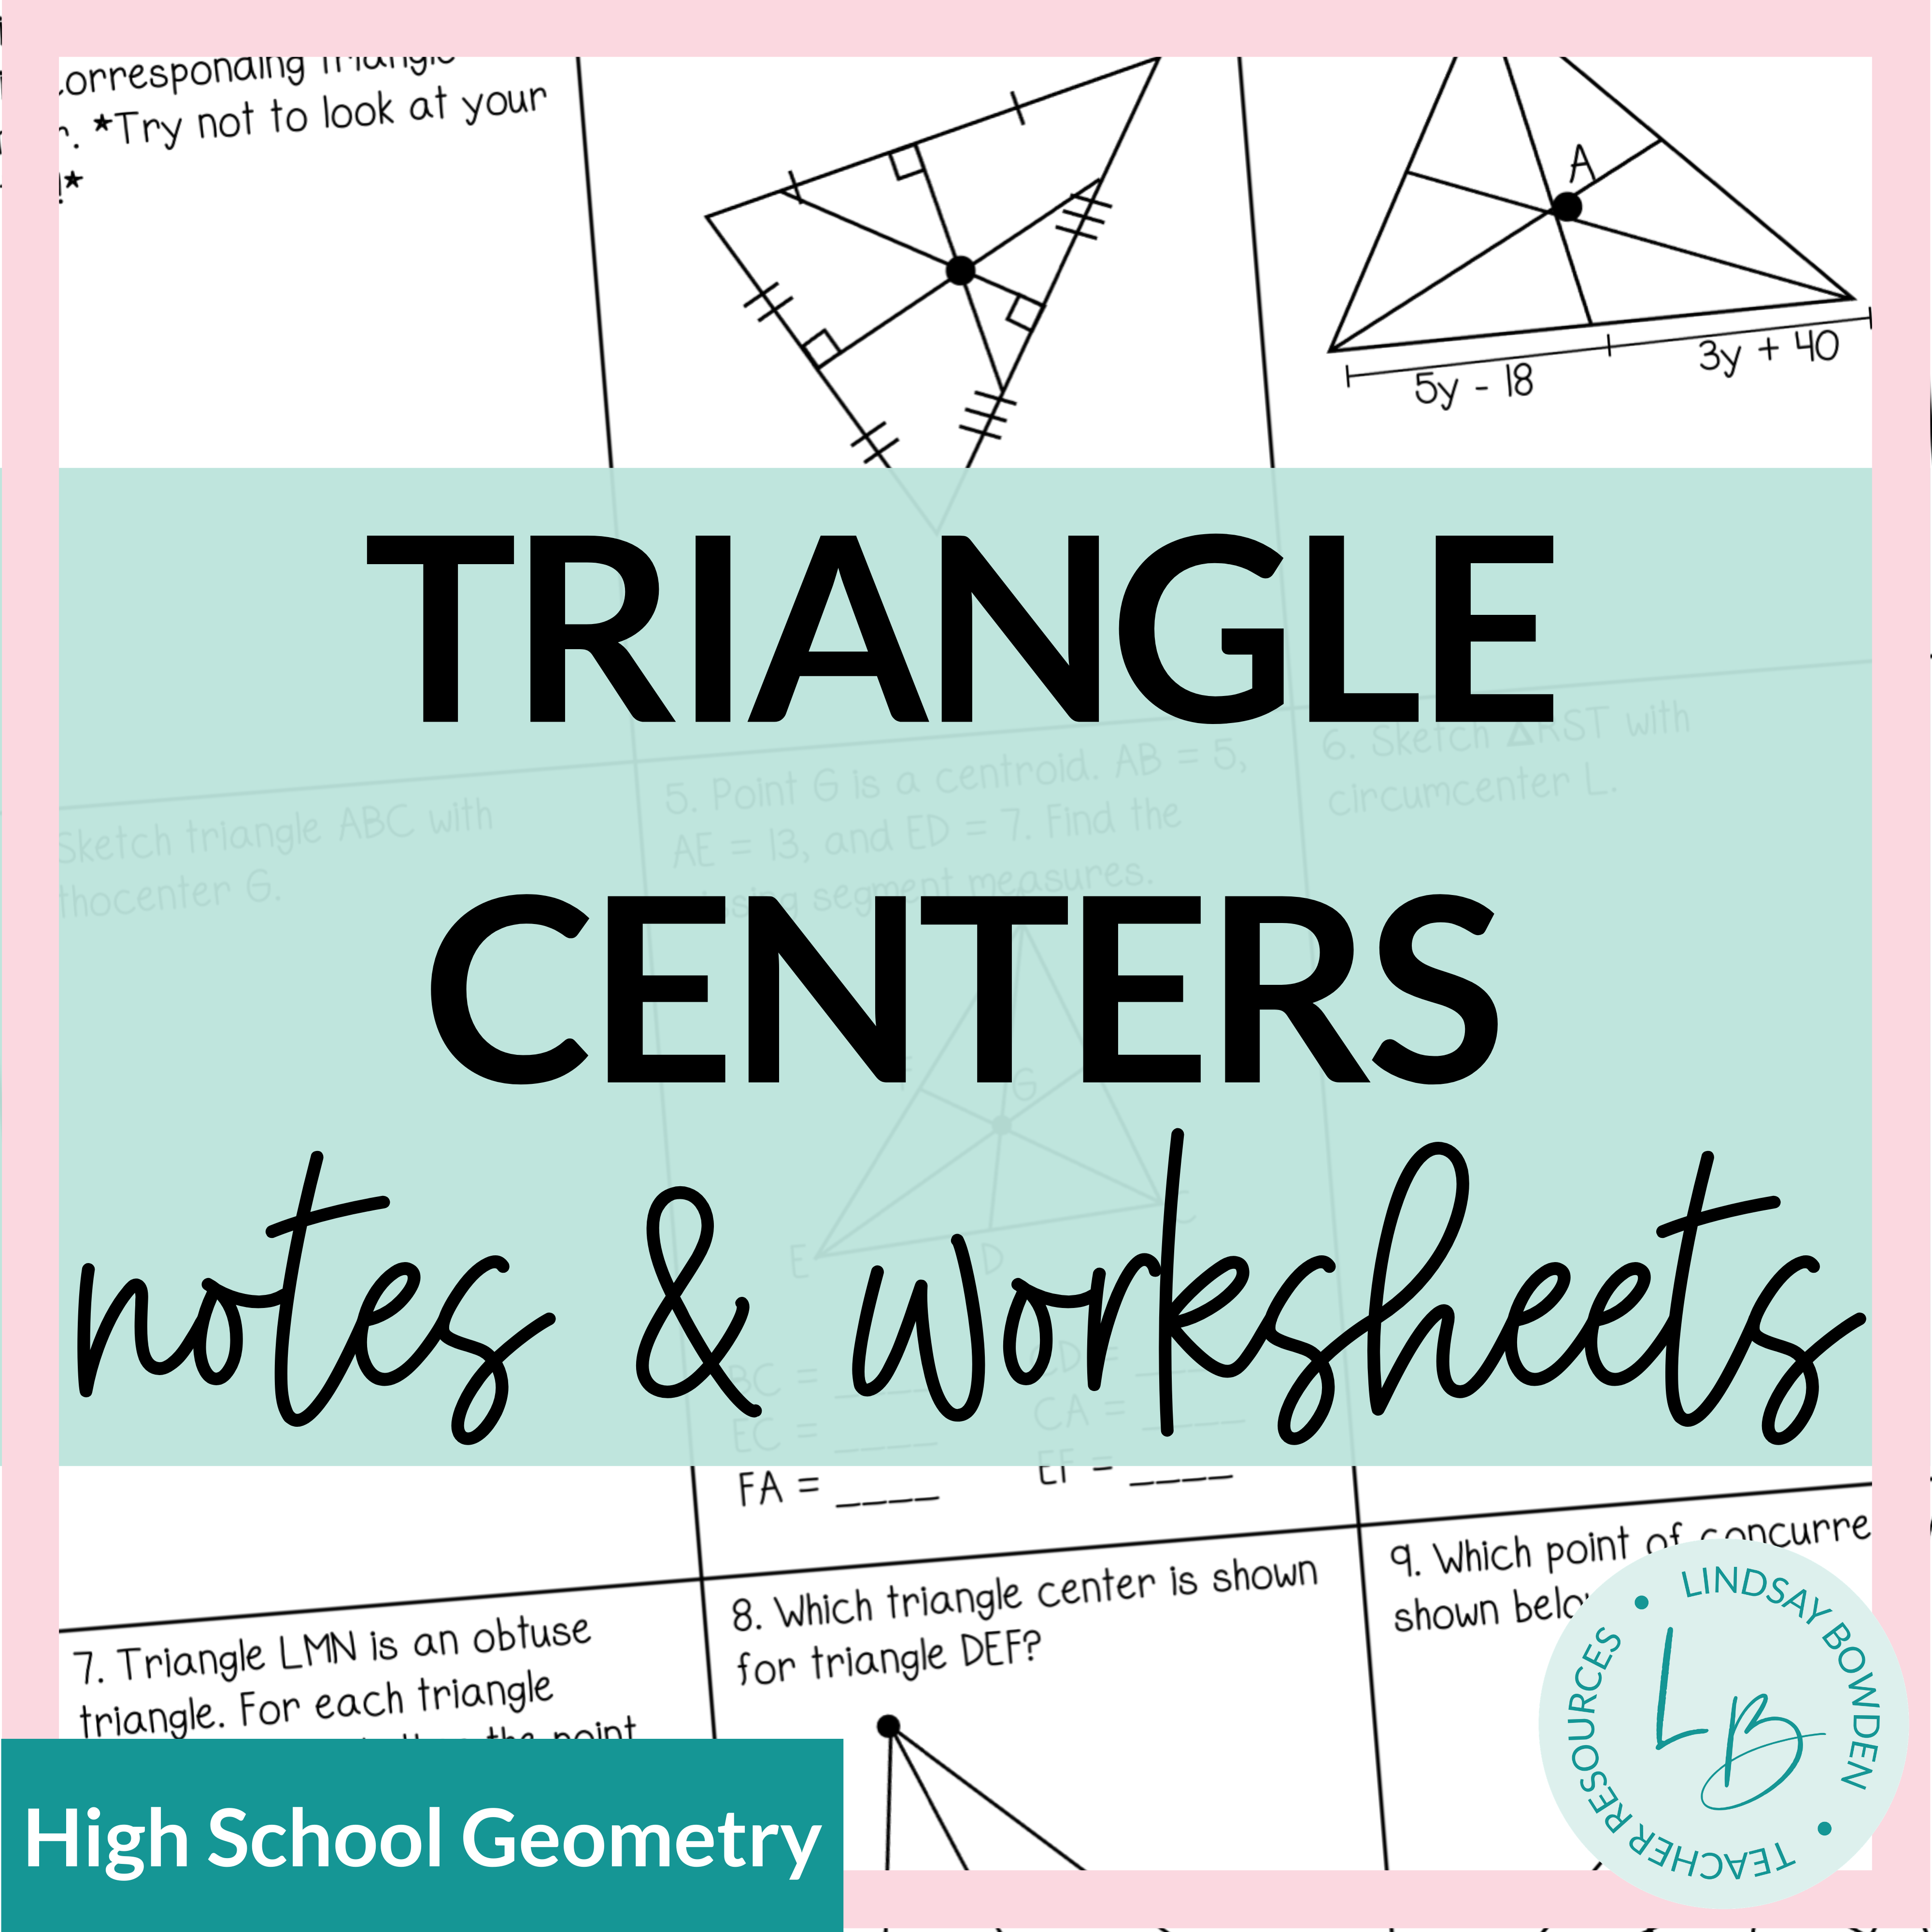 Triangle Centers Notes and Worksheets - Lindsay Bowden Inside Points Of Concurrency Worksheet